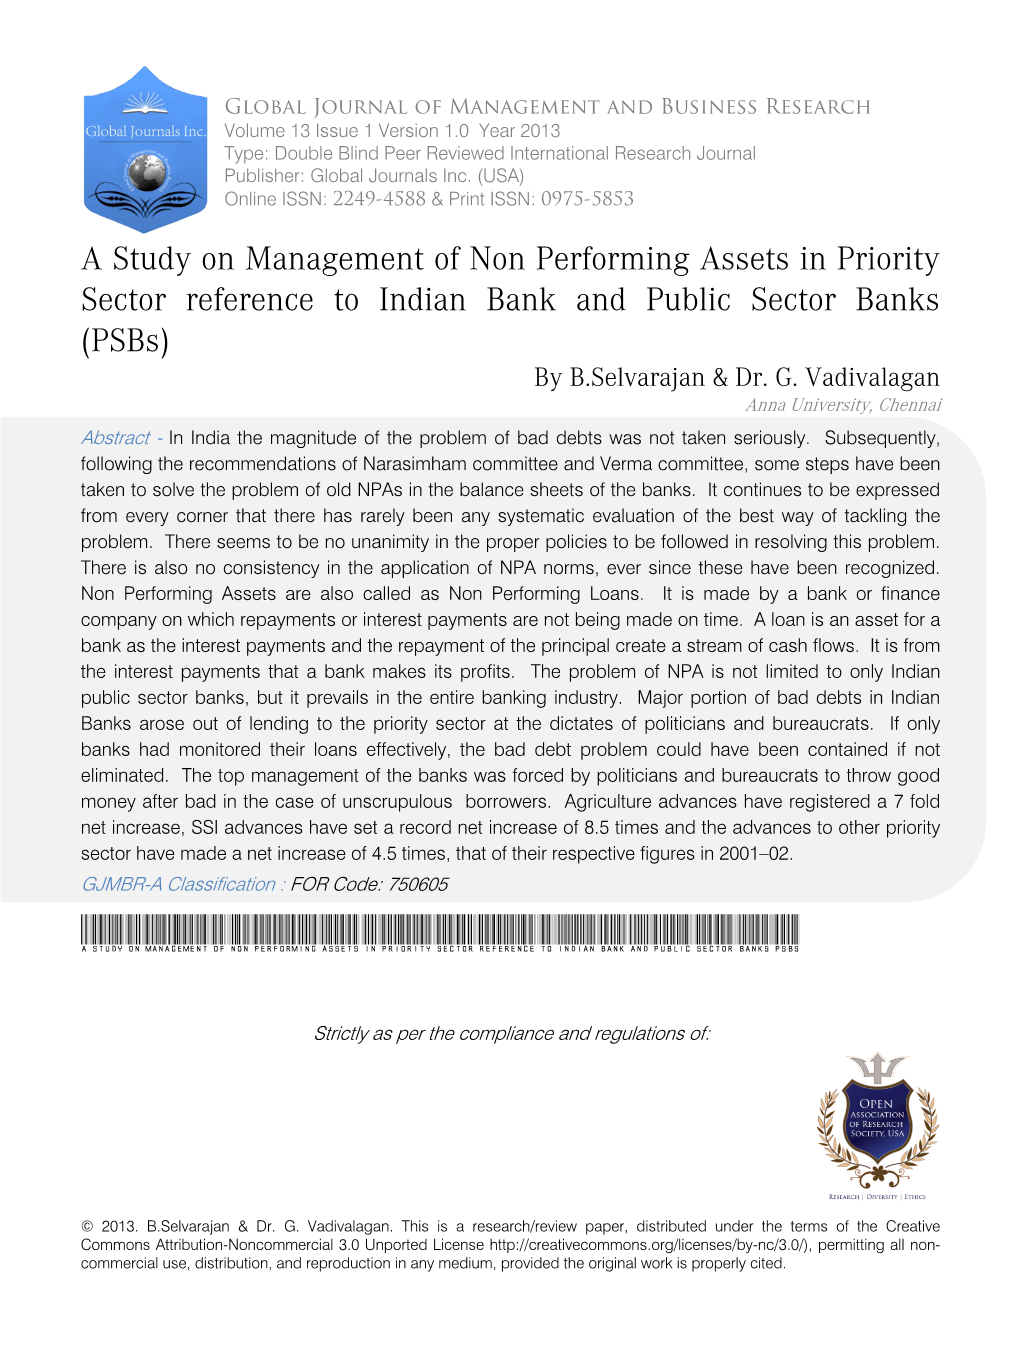 A Study on Management of Non Performing Assets in Priority Sector Reference to Indian Bank and Public Sector Banks (Psbs) by B.Selvarajan & Dr